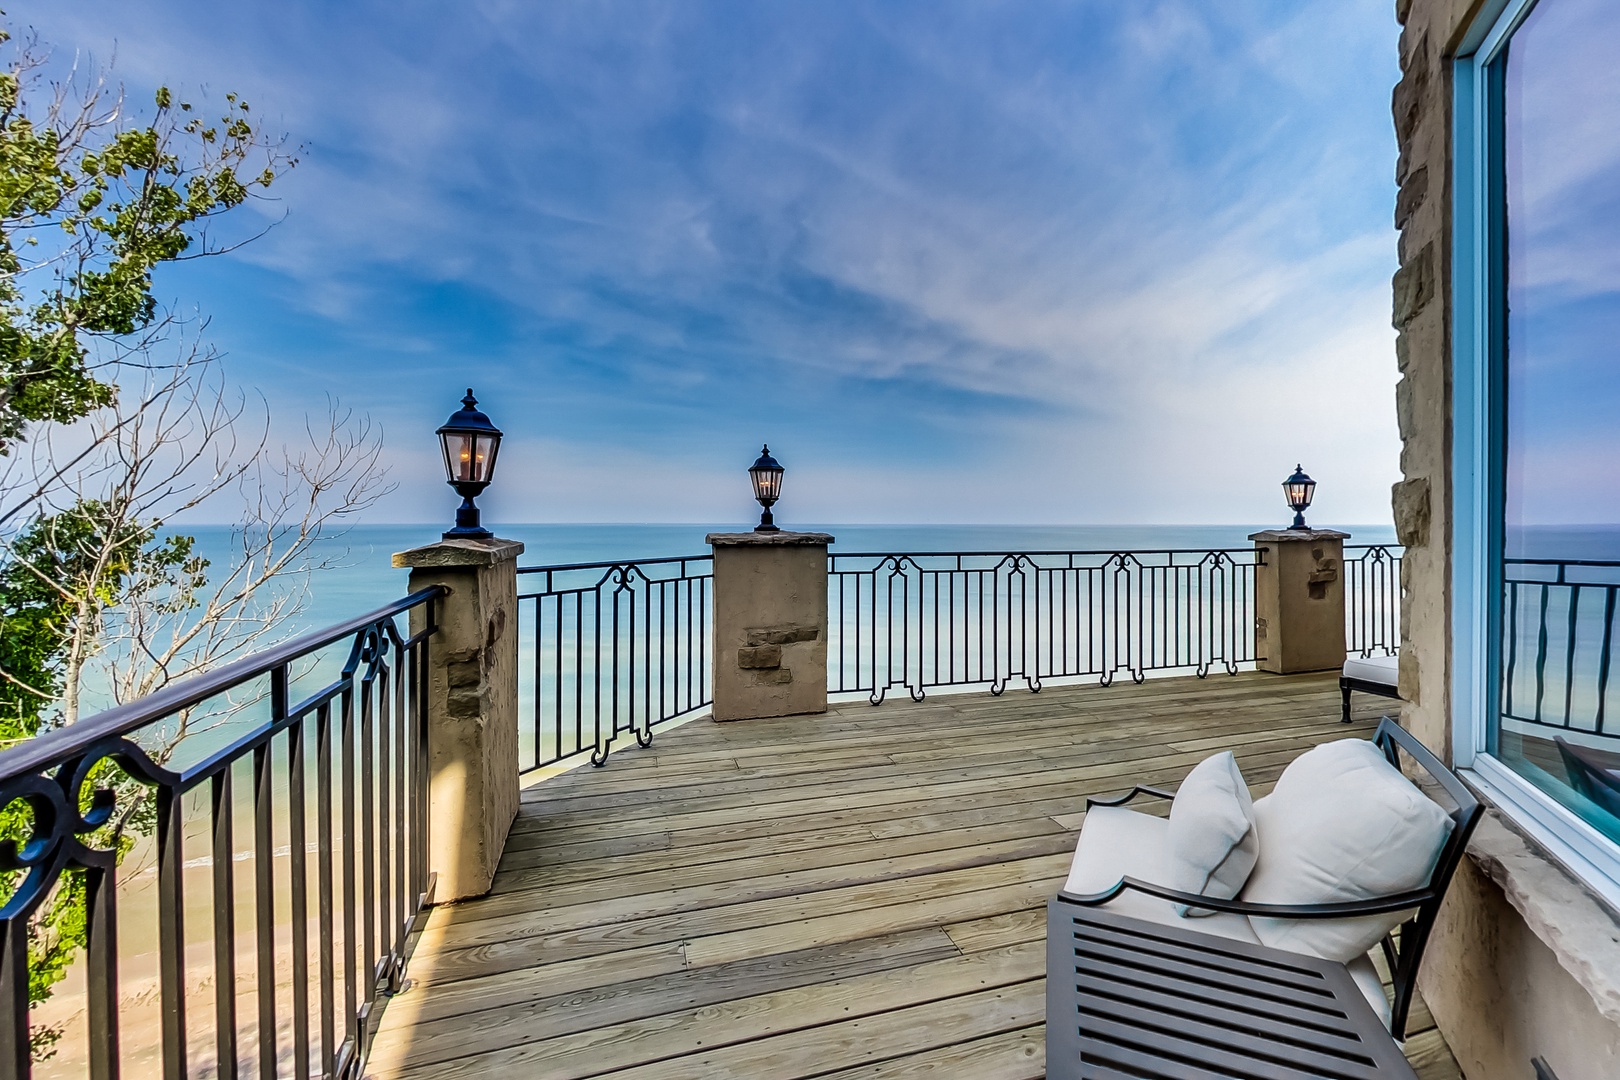 Spend some time on the wraparound deck with comfy seating and to-die-for views.